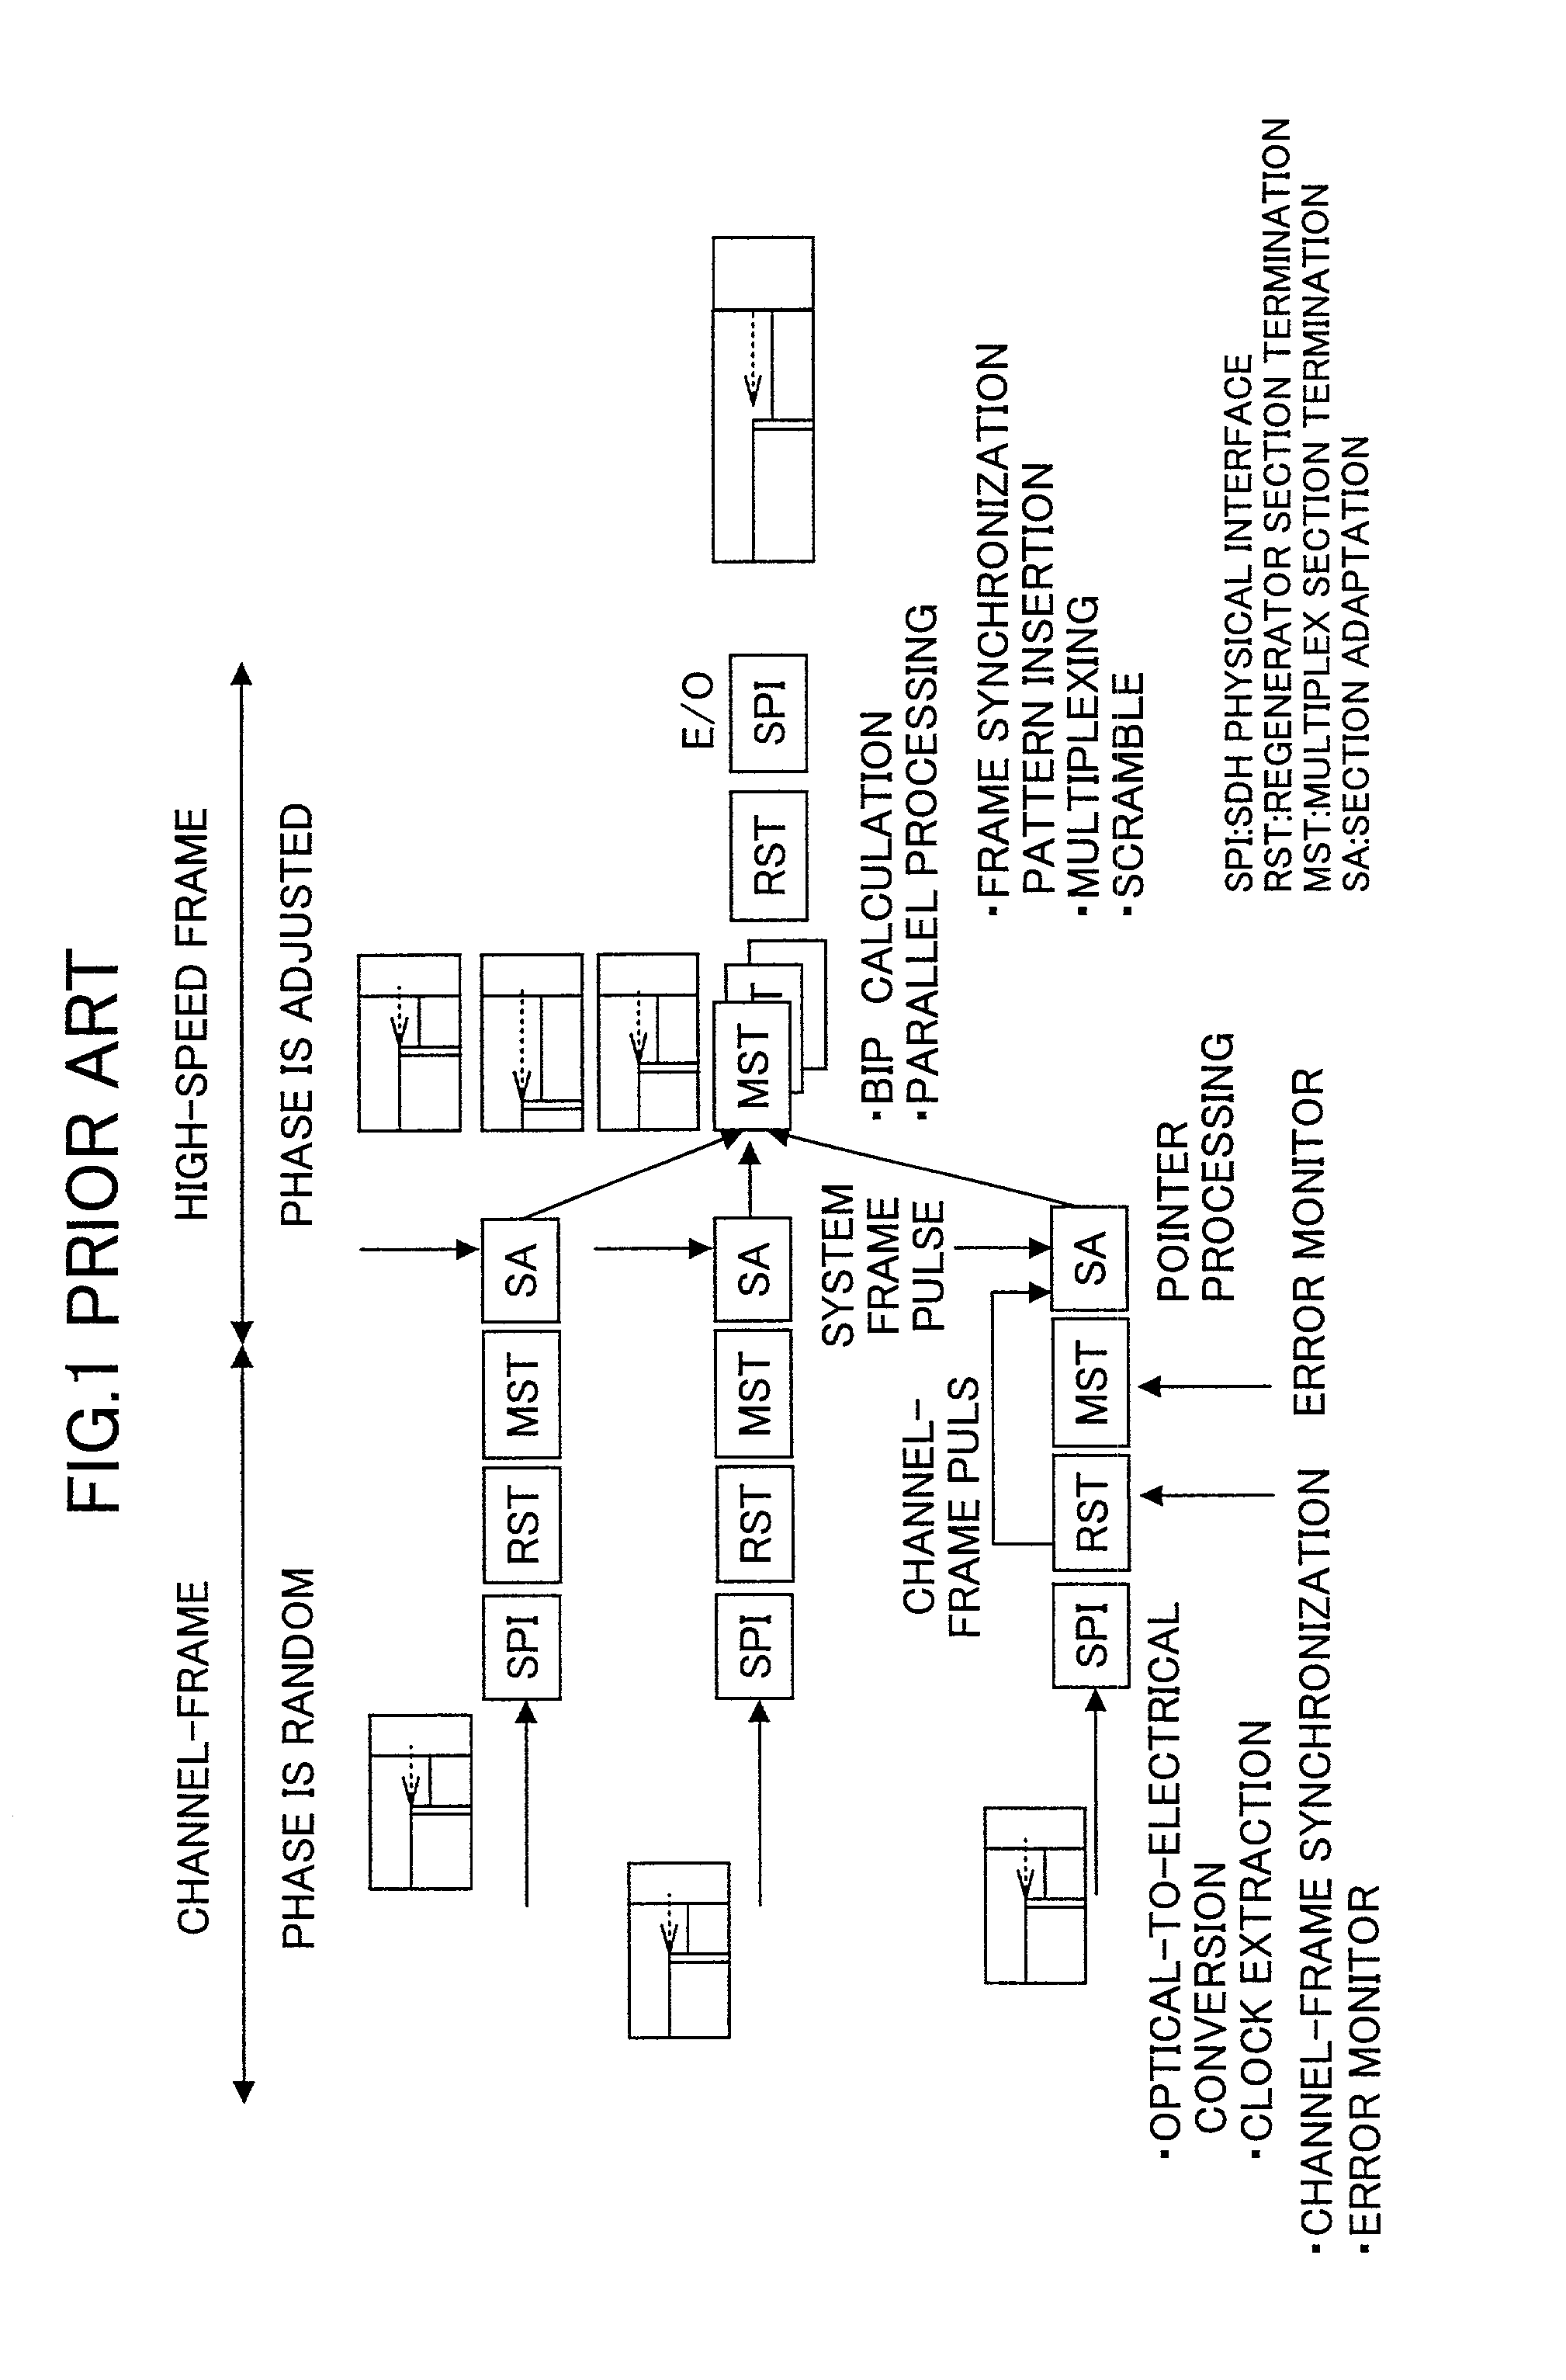 Multiplexing and transmission apparatus